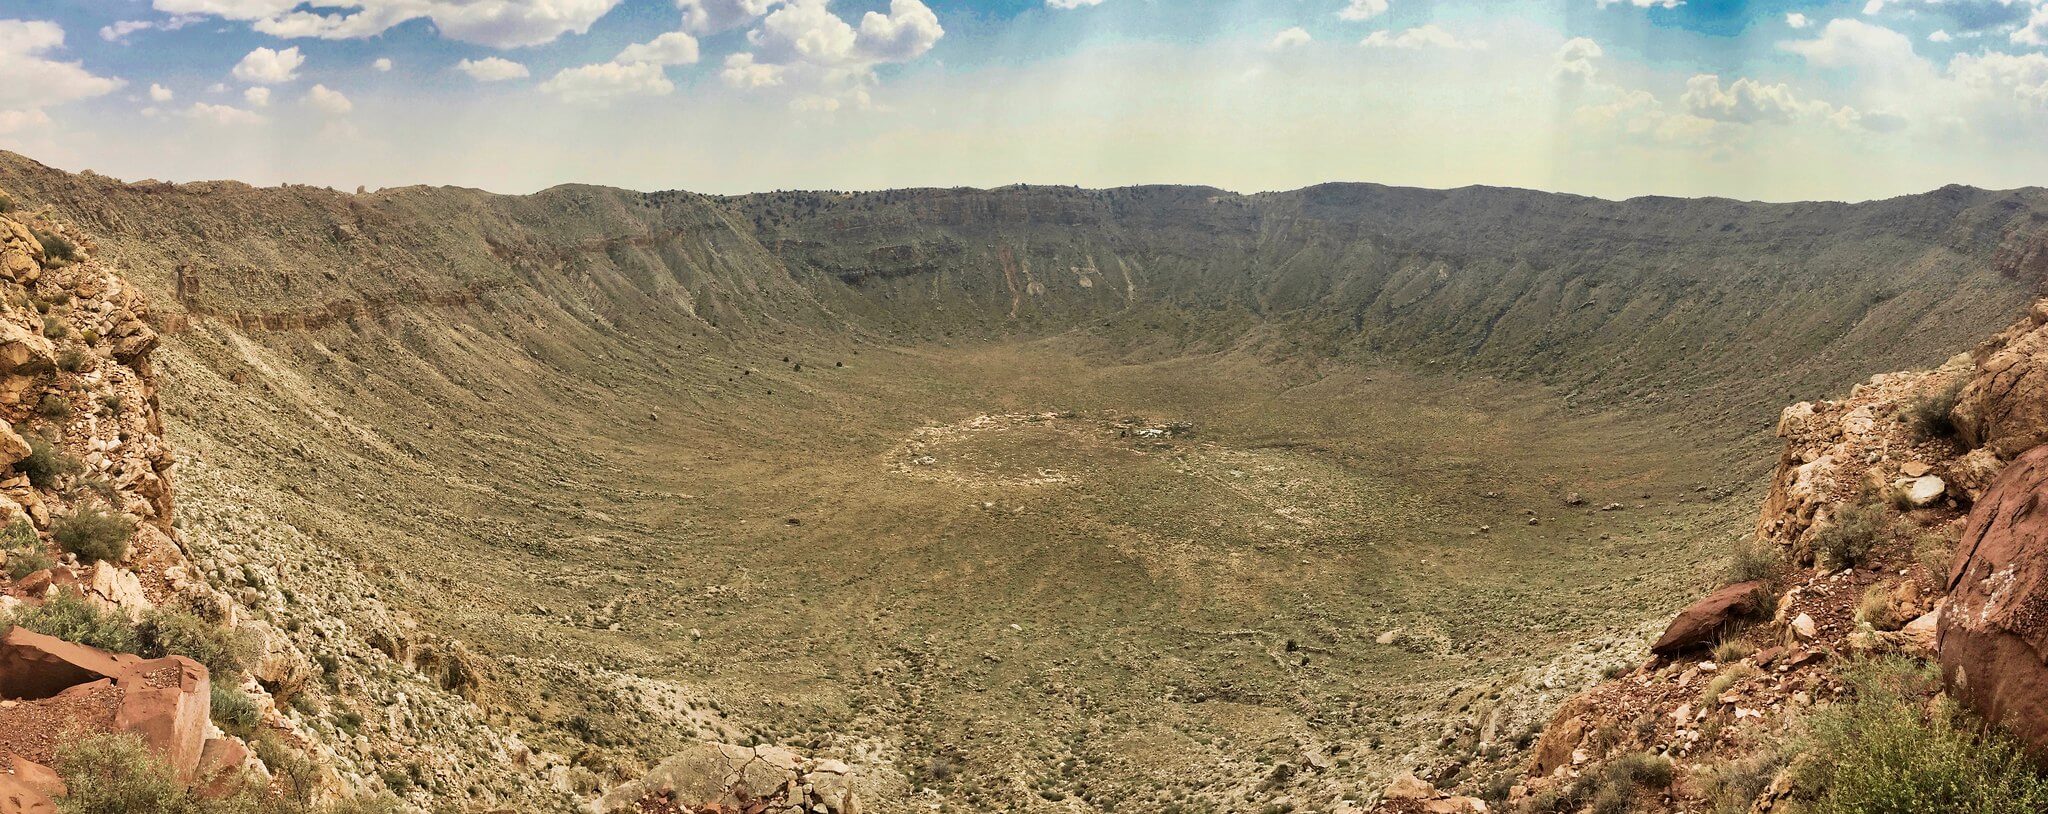 Barringer Crater, also known as Meteor Crater, near Winslow, Arizona.